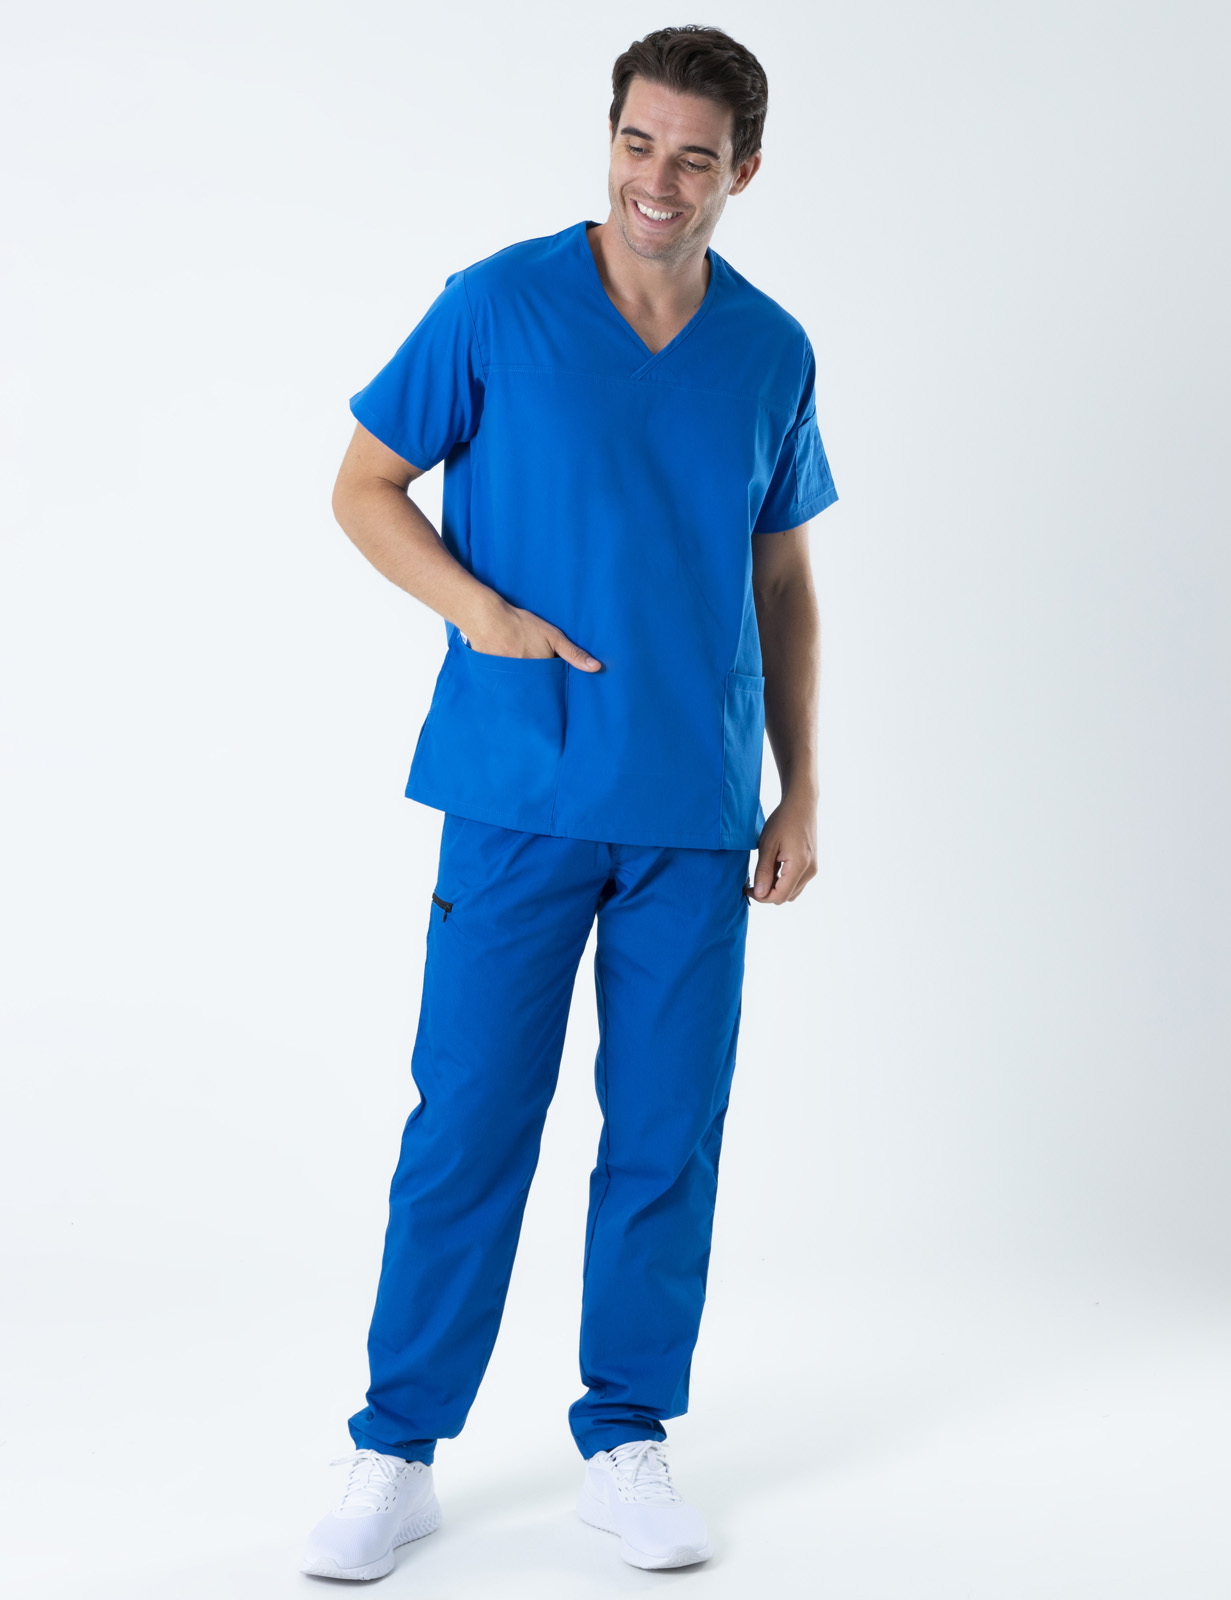 Men's Fit Solid Scrub Top - Royal - 4X large